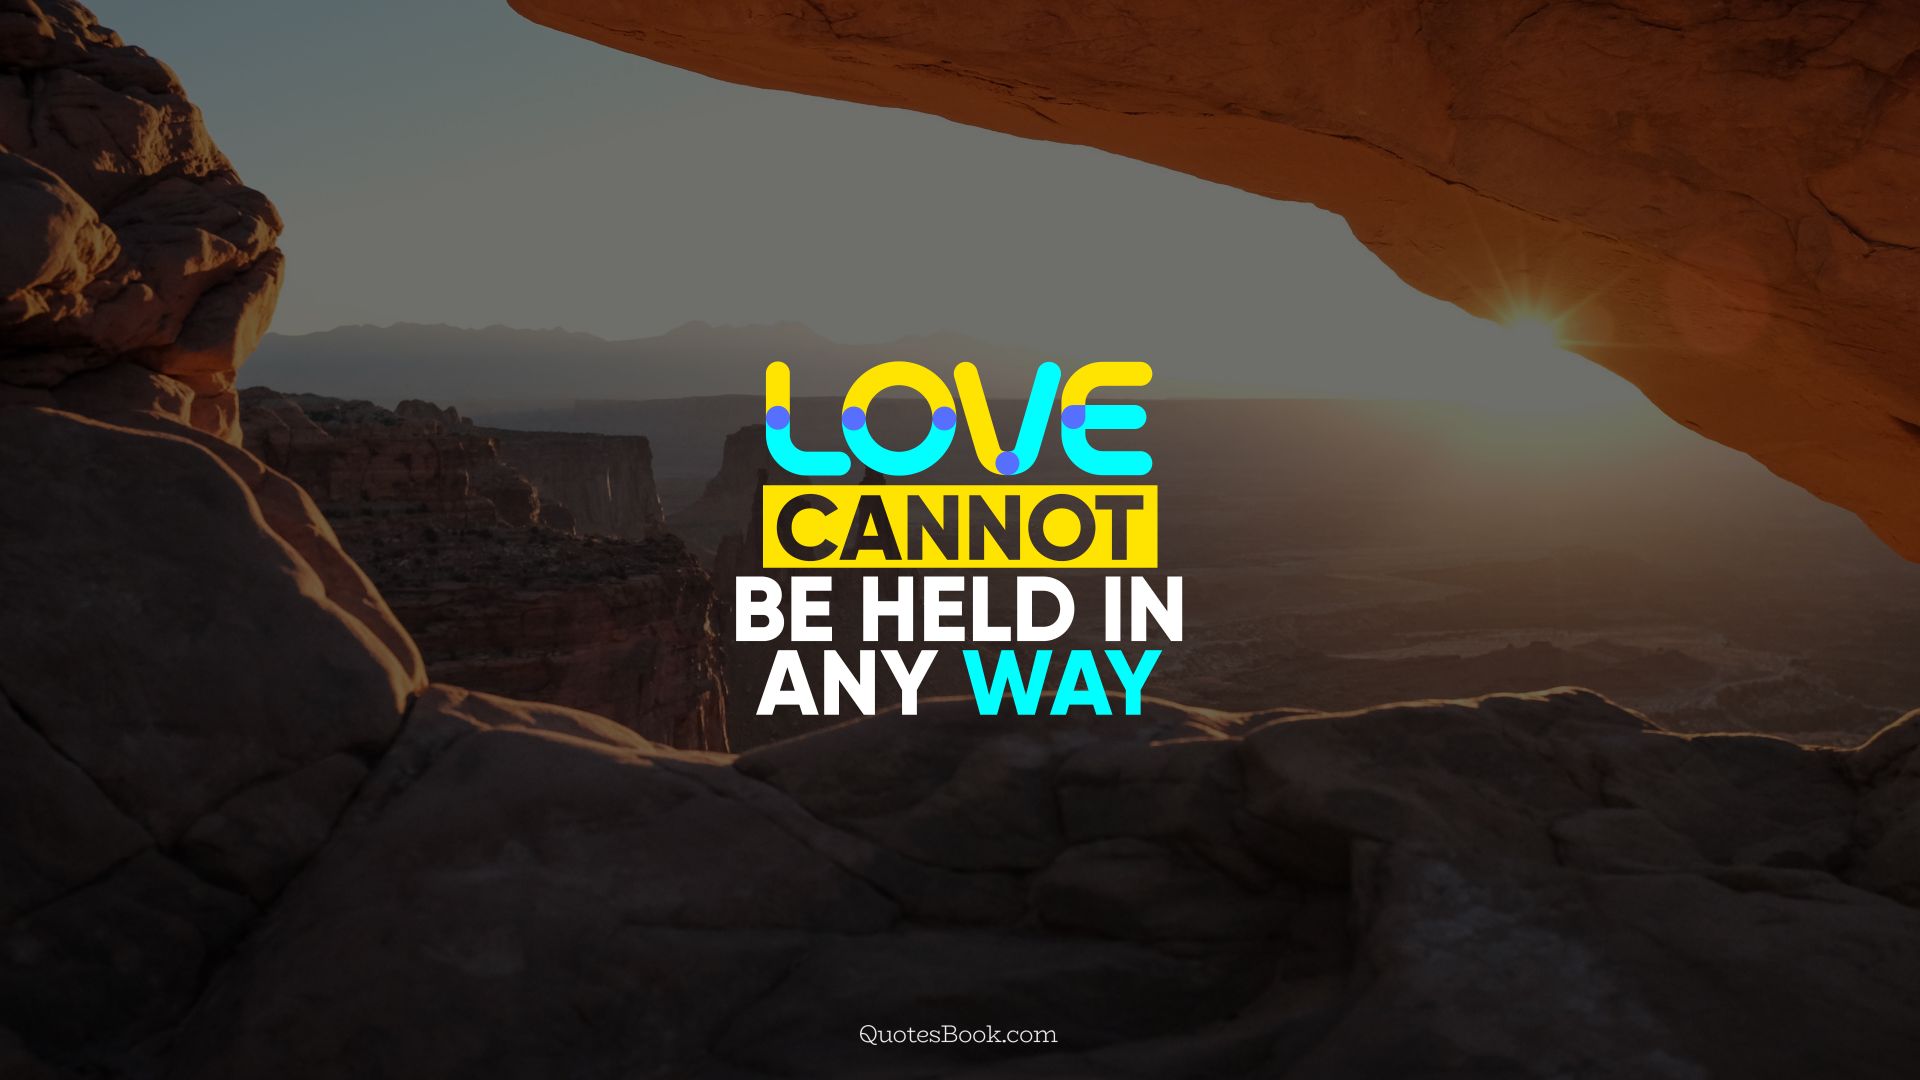 Love cannot be held in any way. - Quote by QuotesBook